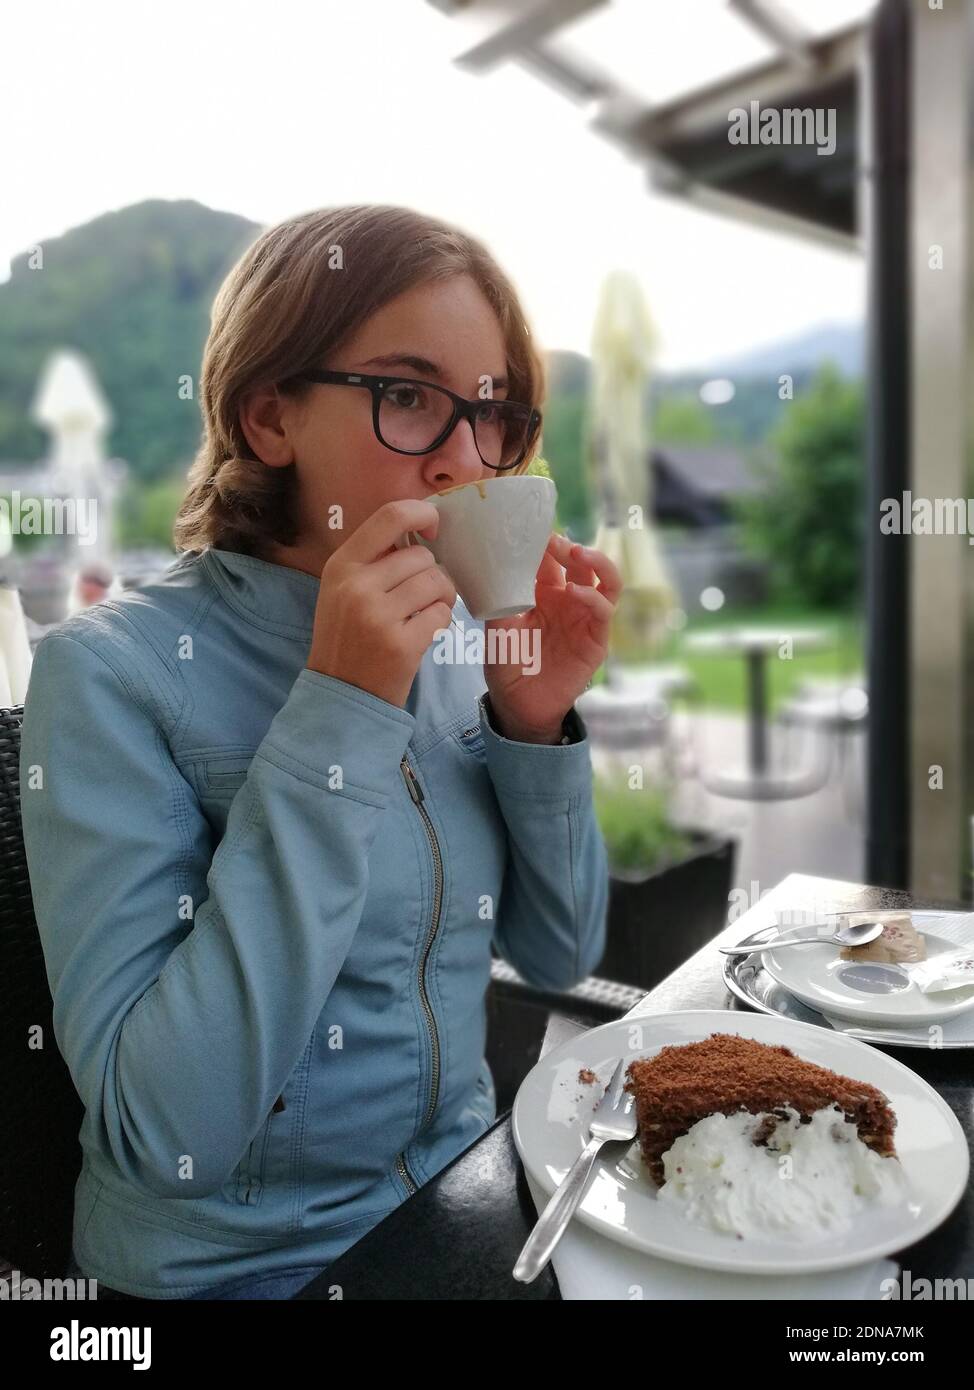 Girl Having Food And Drink At Outdoor Restaurant Stock Photo